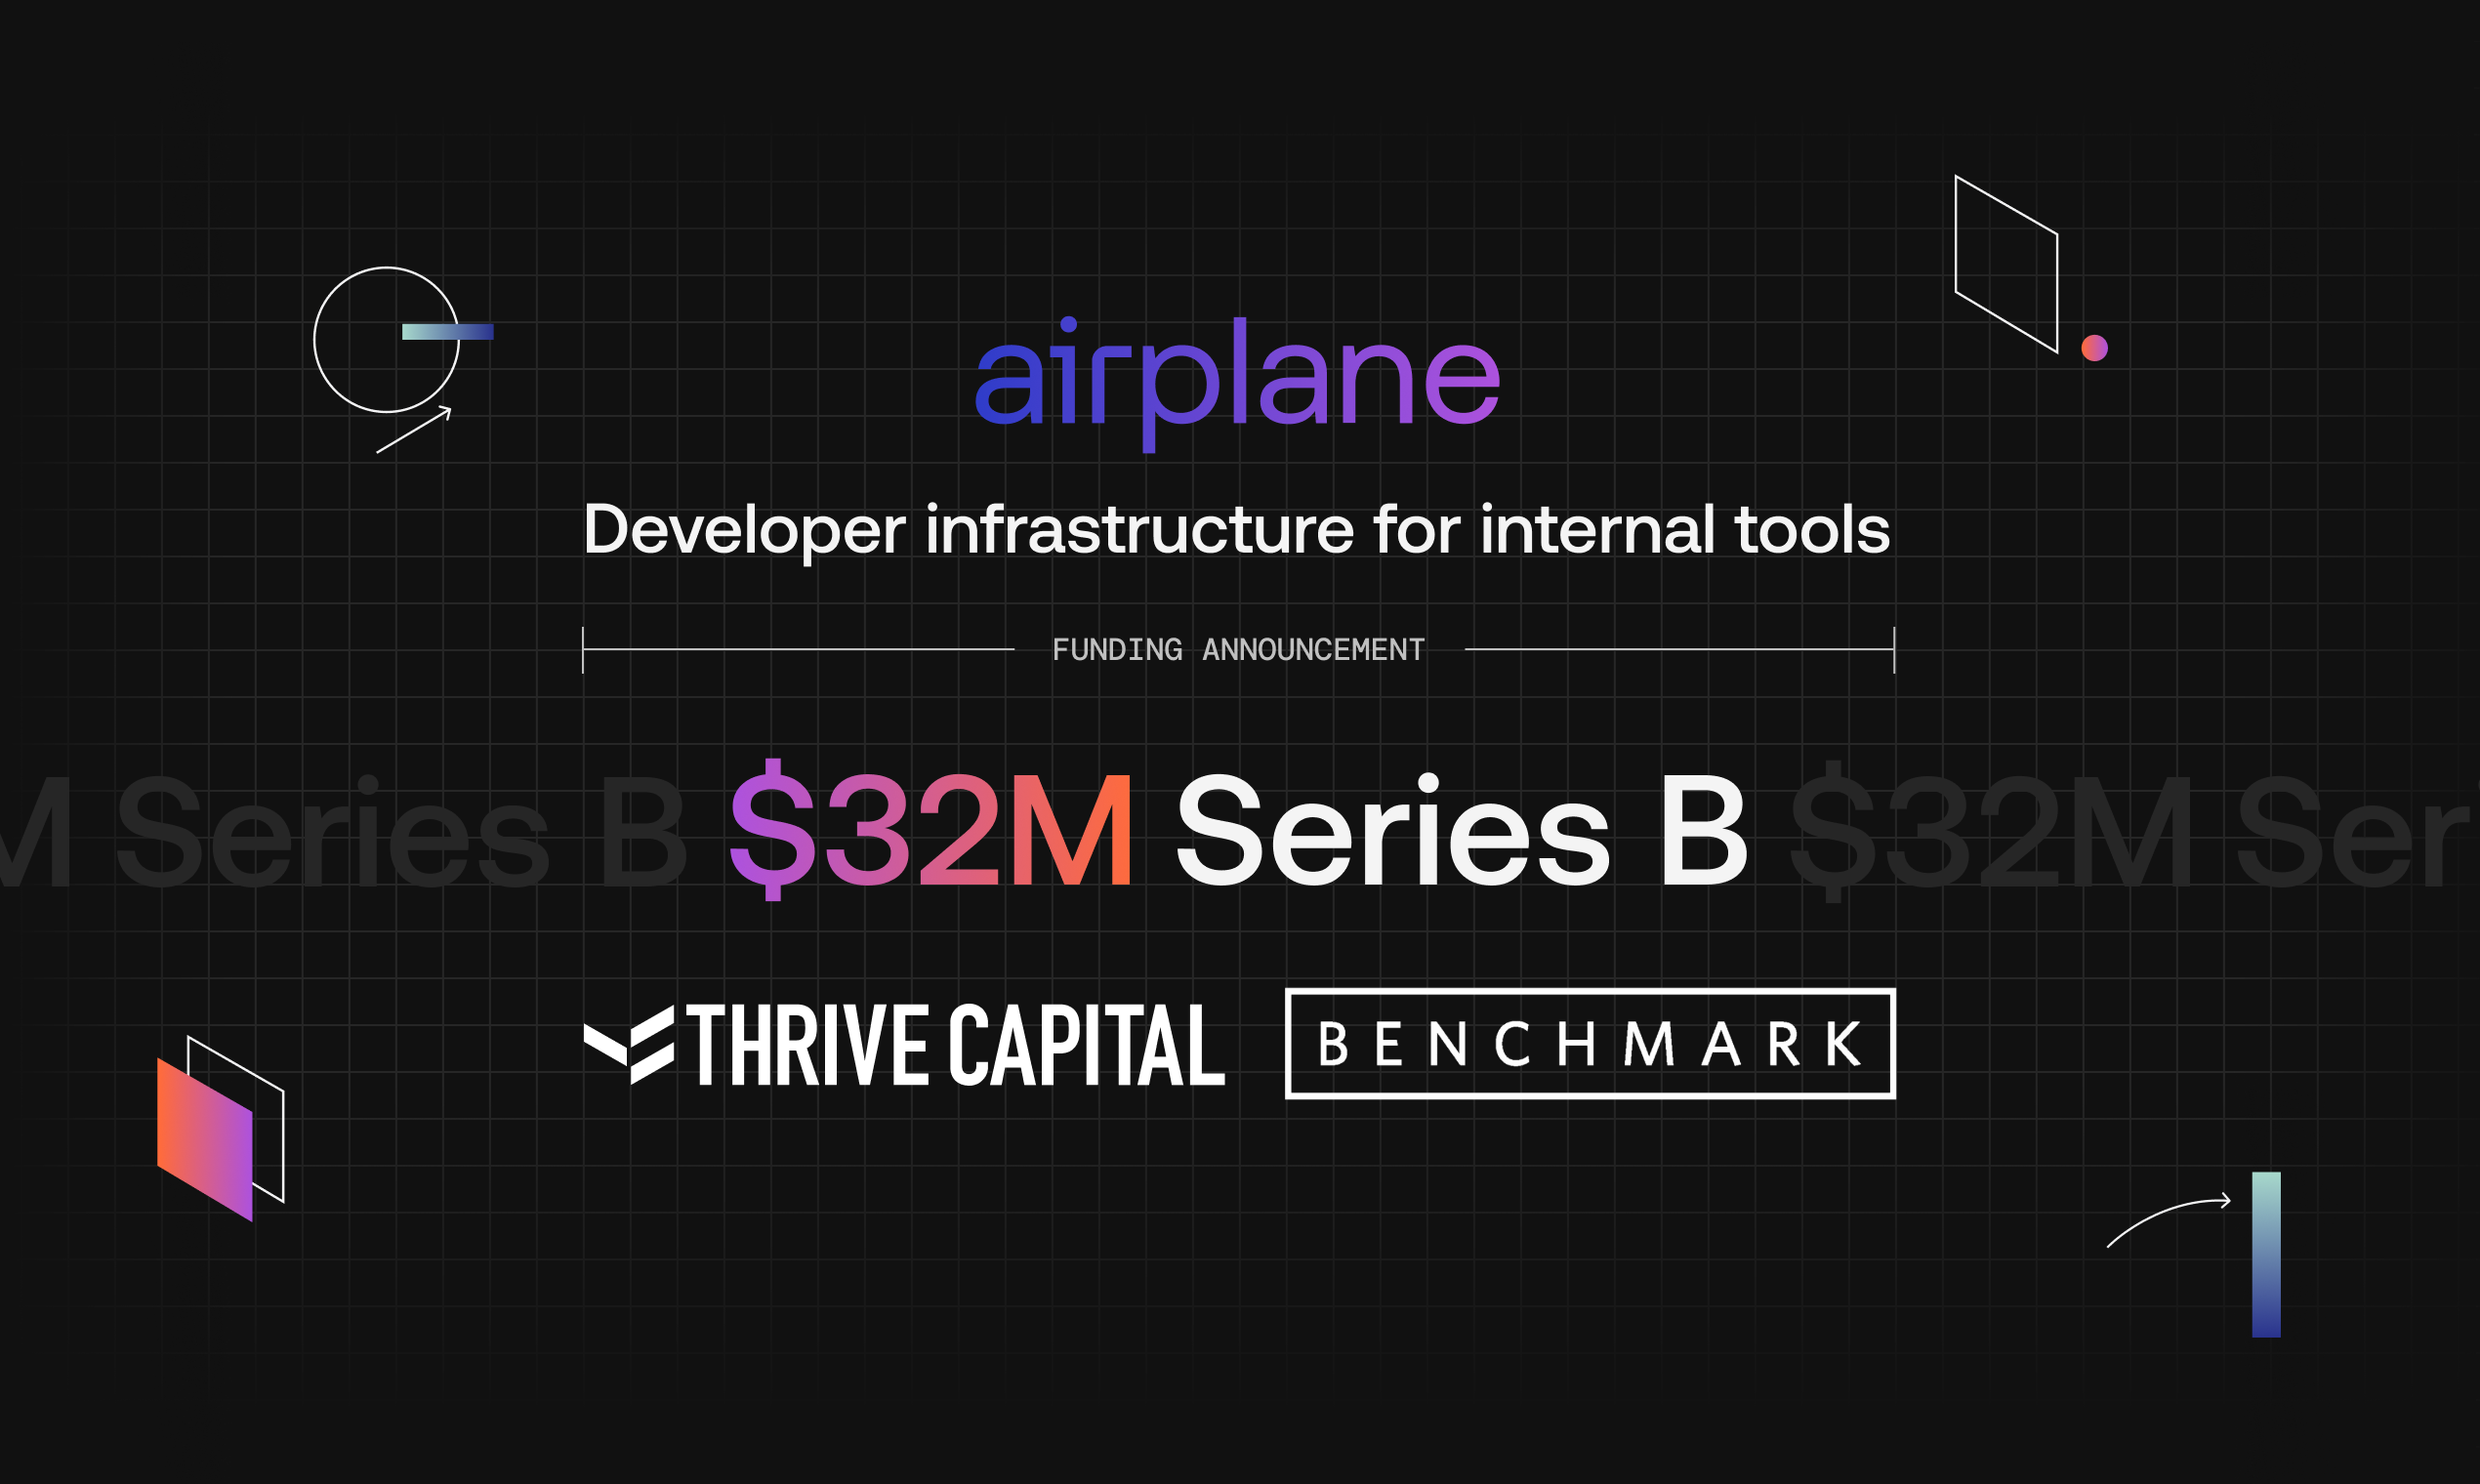 Airplane announces $32M in Series B financing led by Thrive Capital